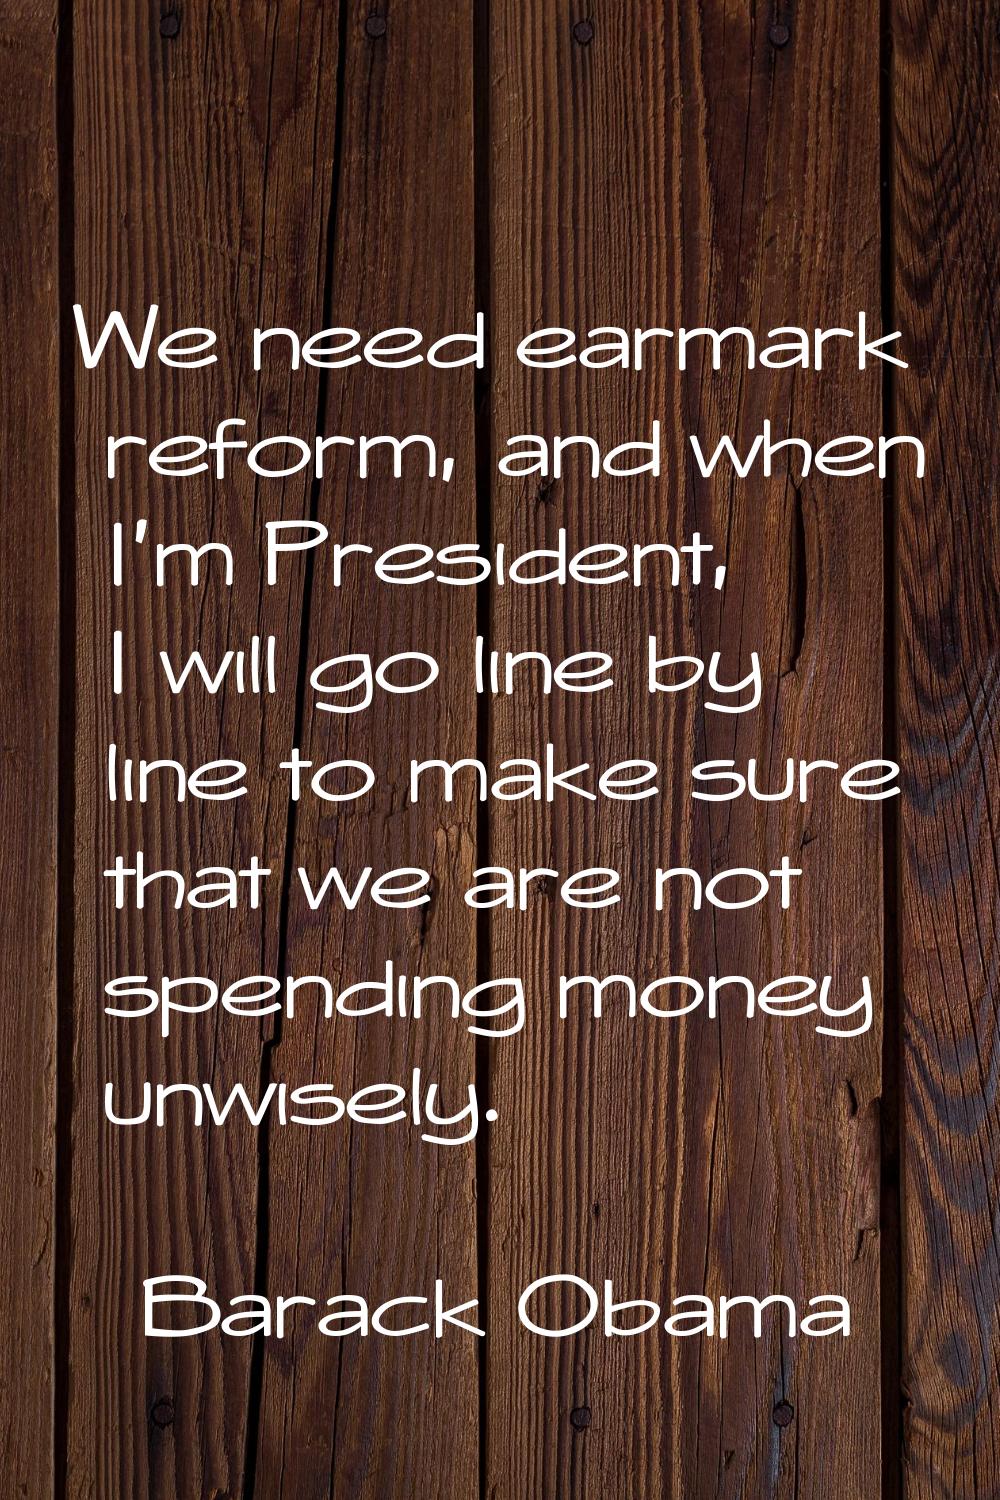 We need earmark reform, and when I'm President, I will go line by line to make sure that we are not